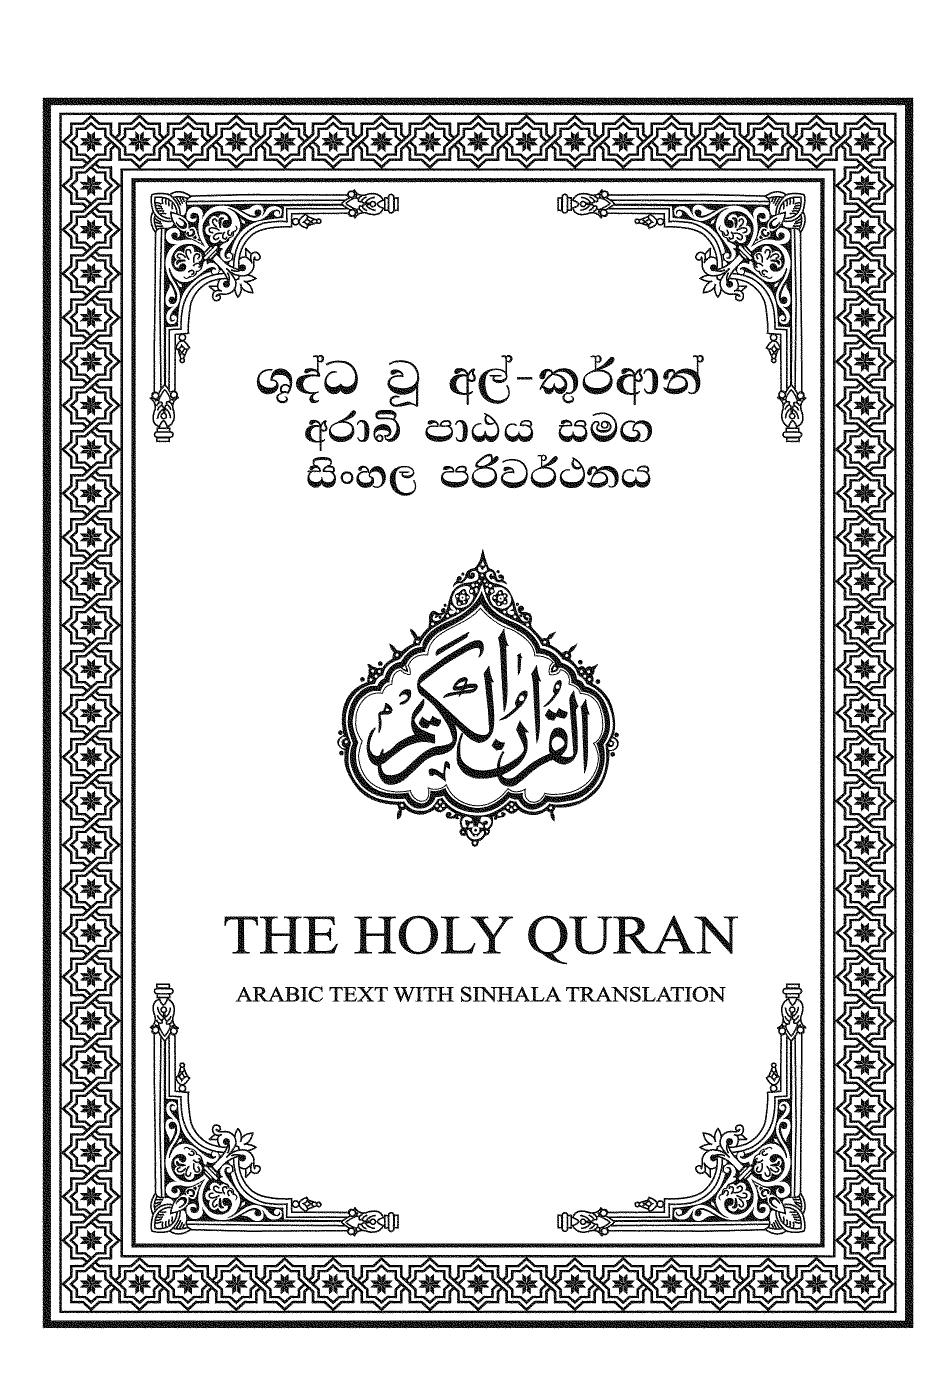 The Holy Quran Arabic Text with Sinhala Translation